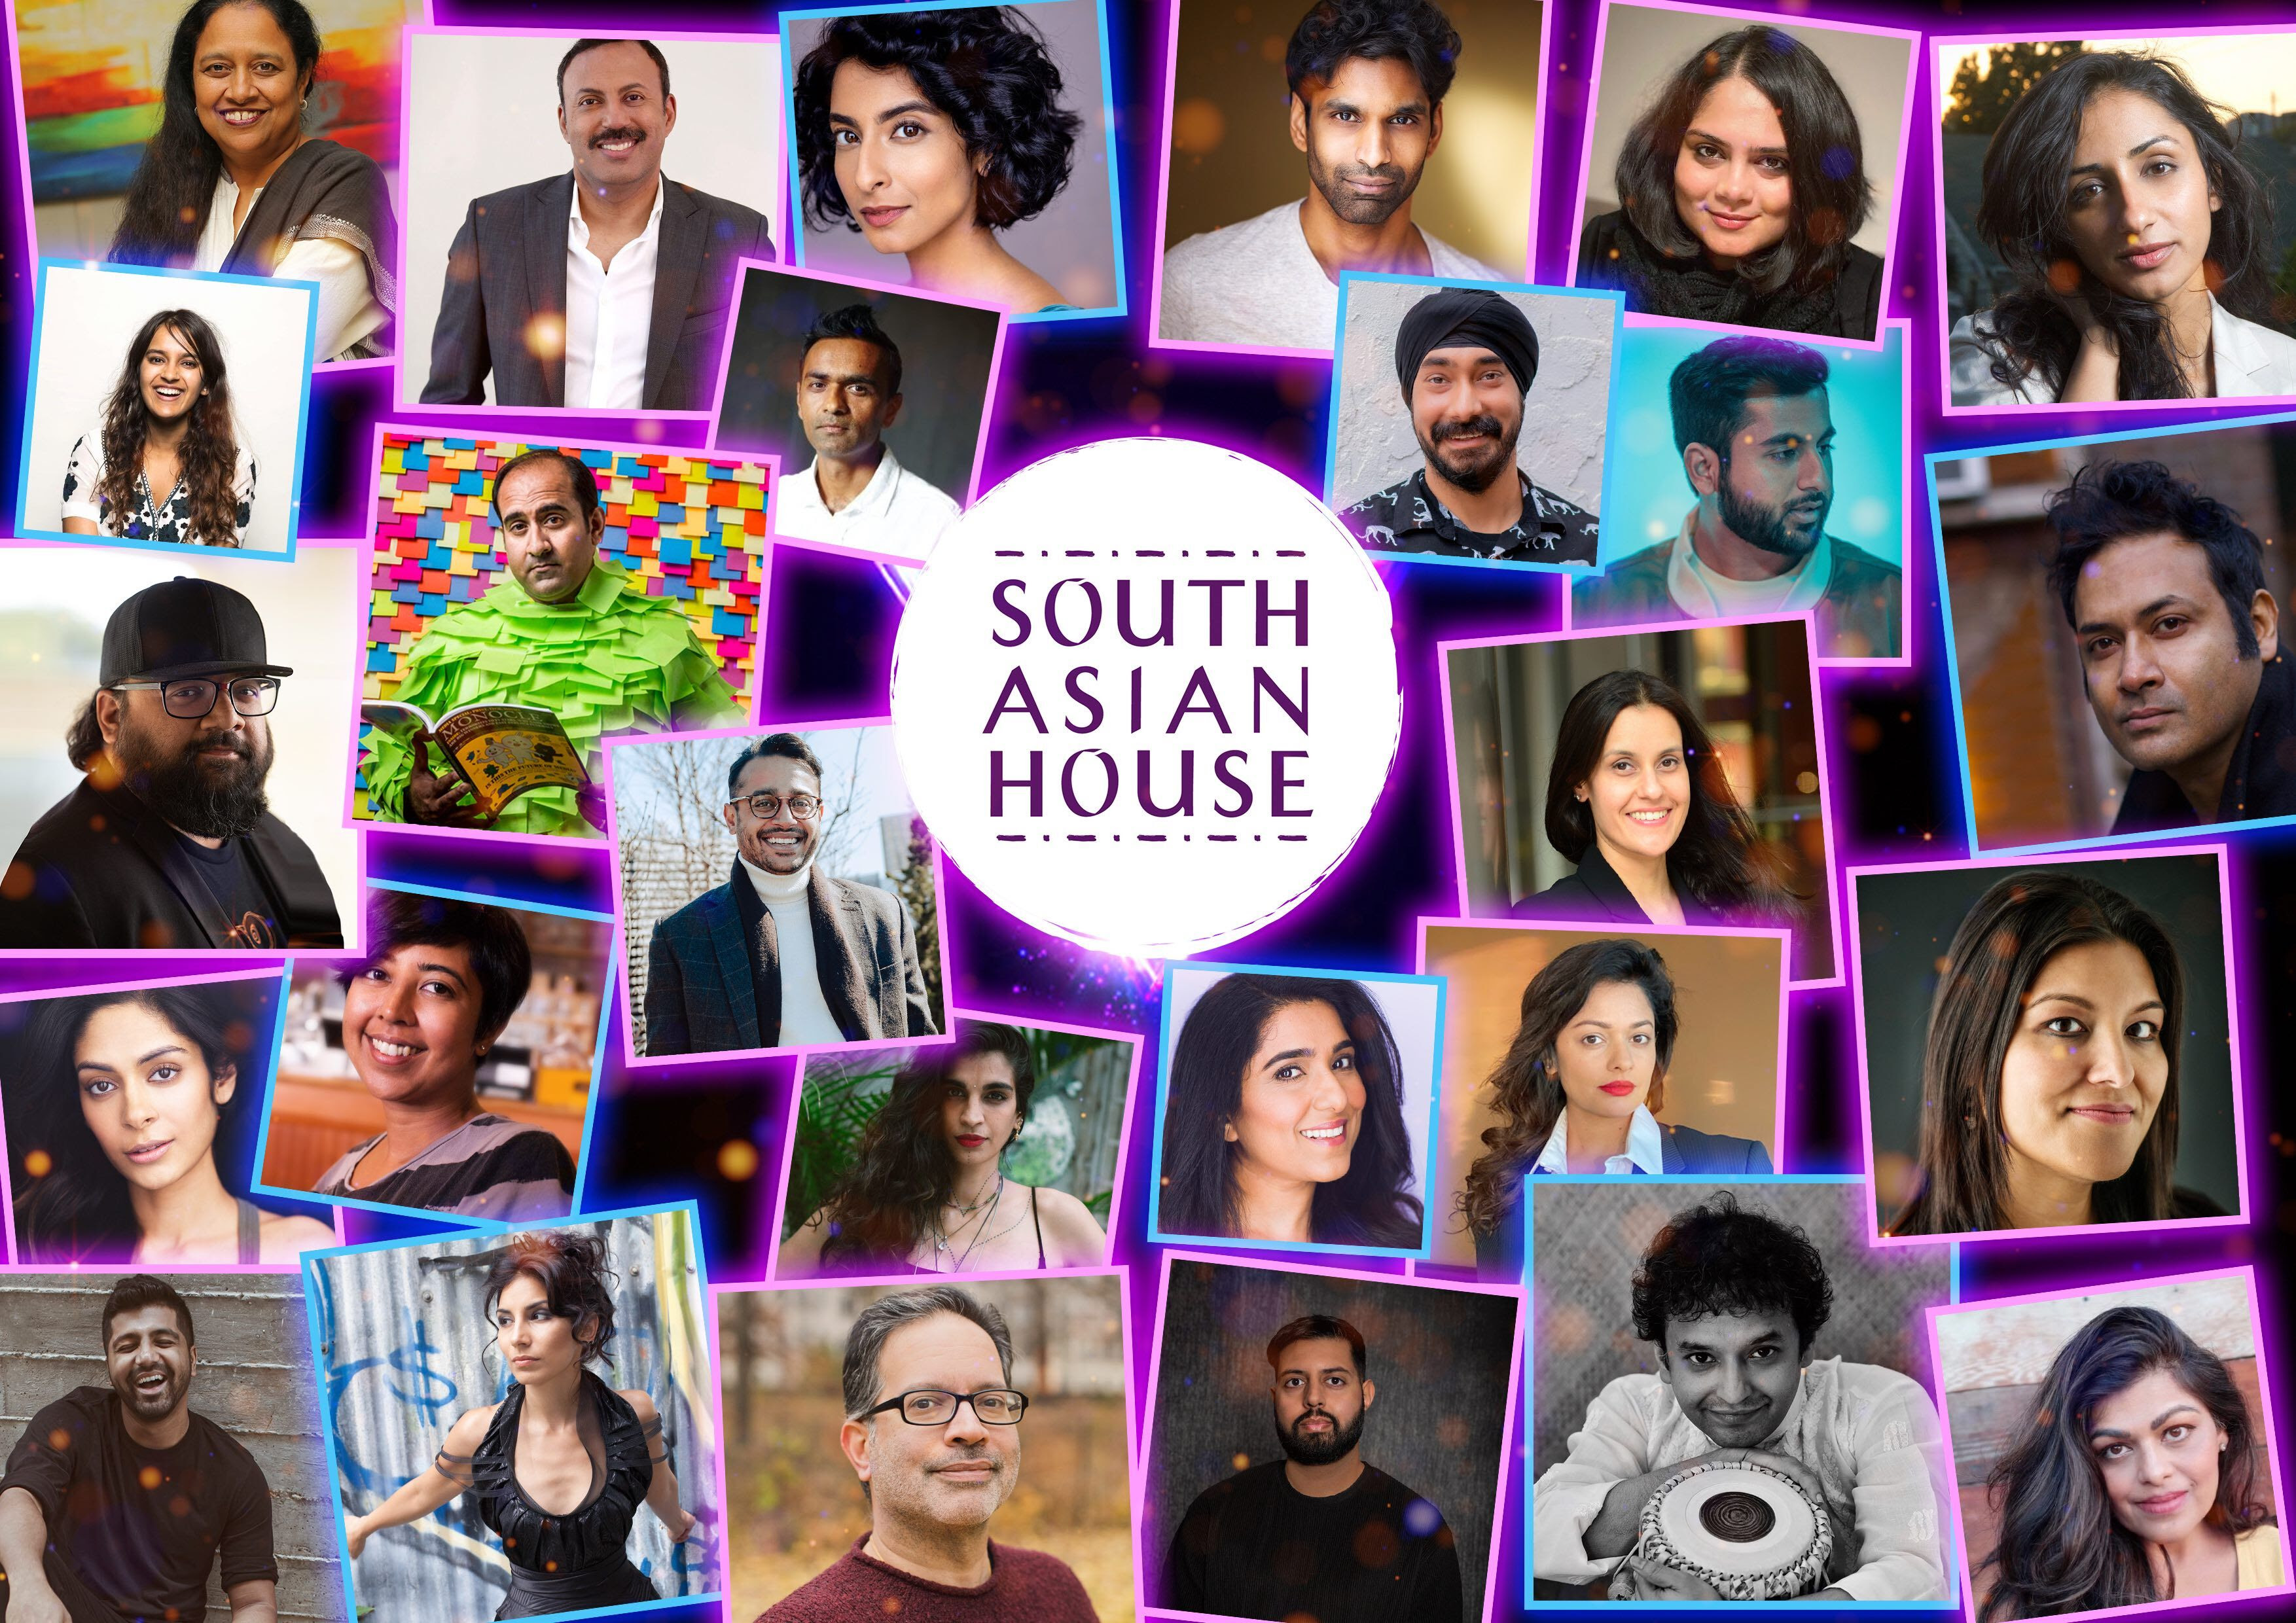 First-ever South Asian House launches at SXSW this week